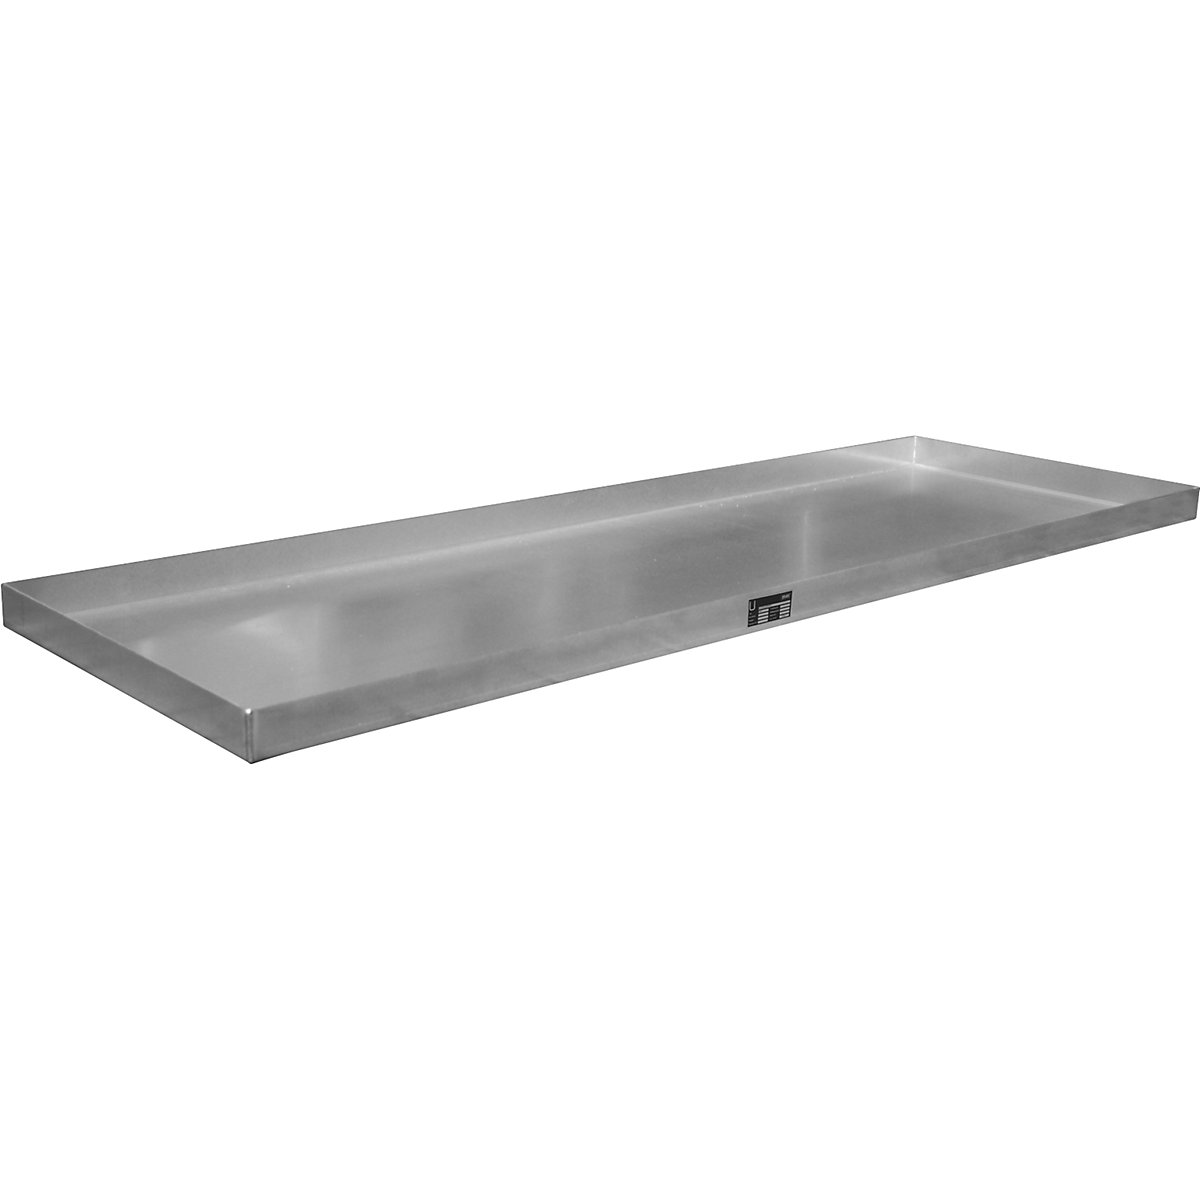 Stainless steel small container sump – eurokraft pro, with certification, 60 l, LxWxH 1850 x 600 x 60 mm-7